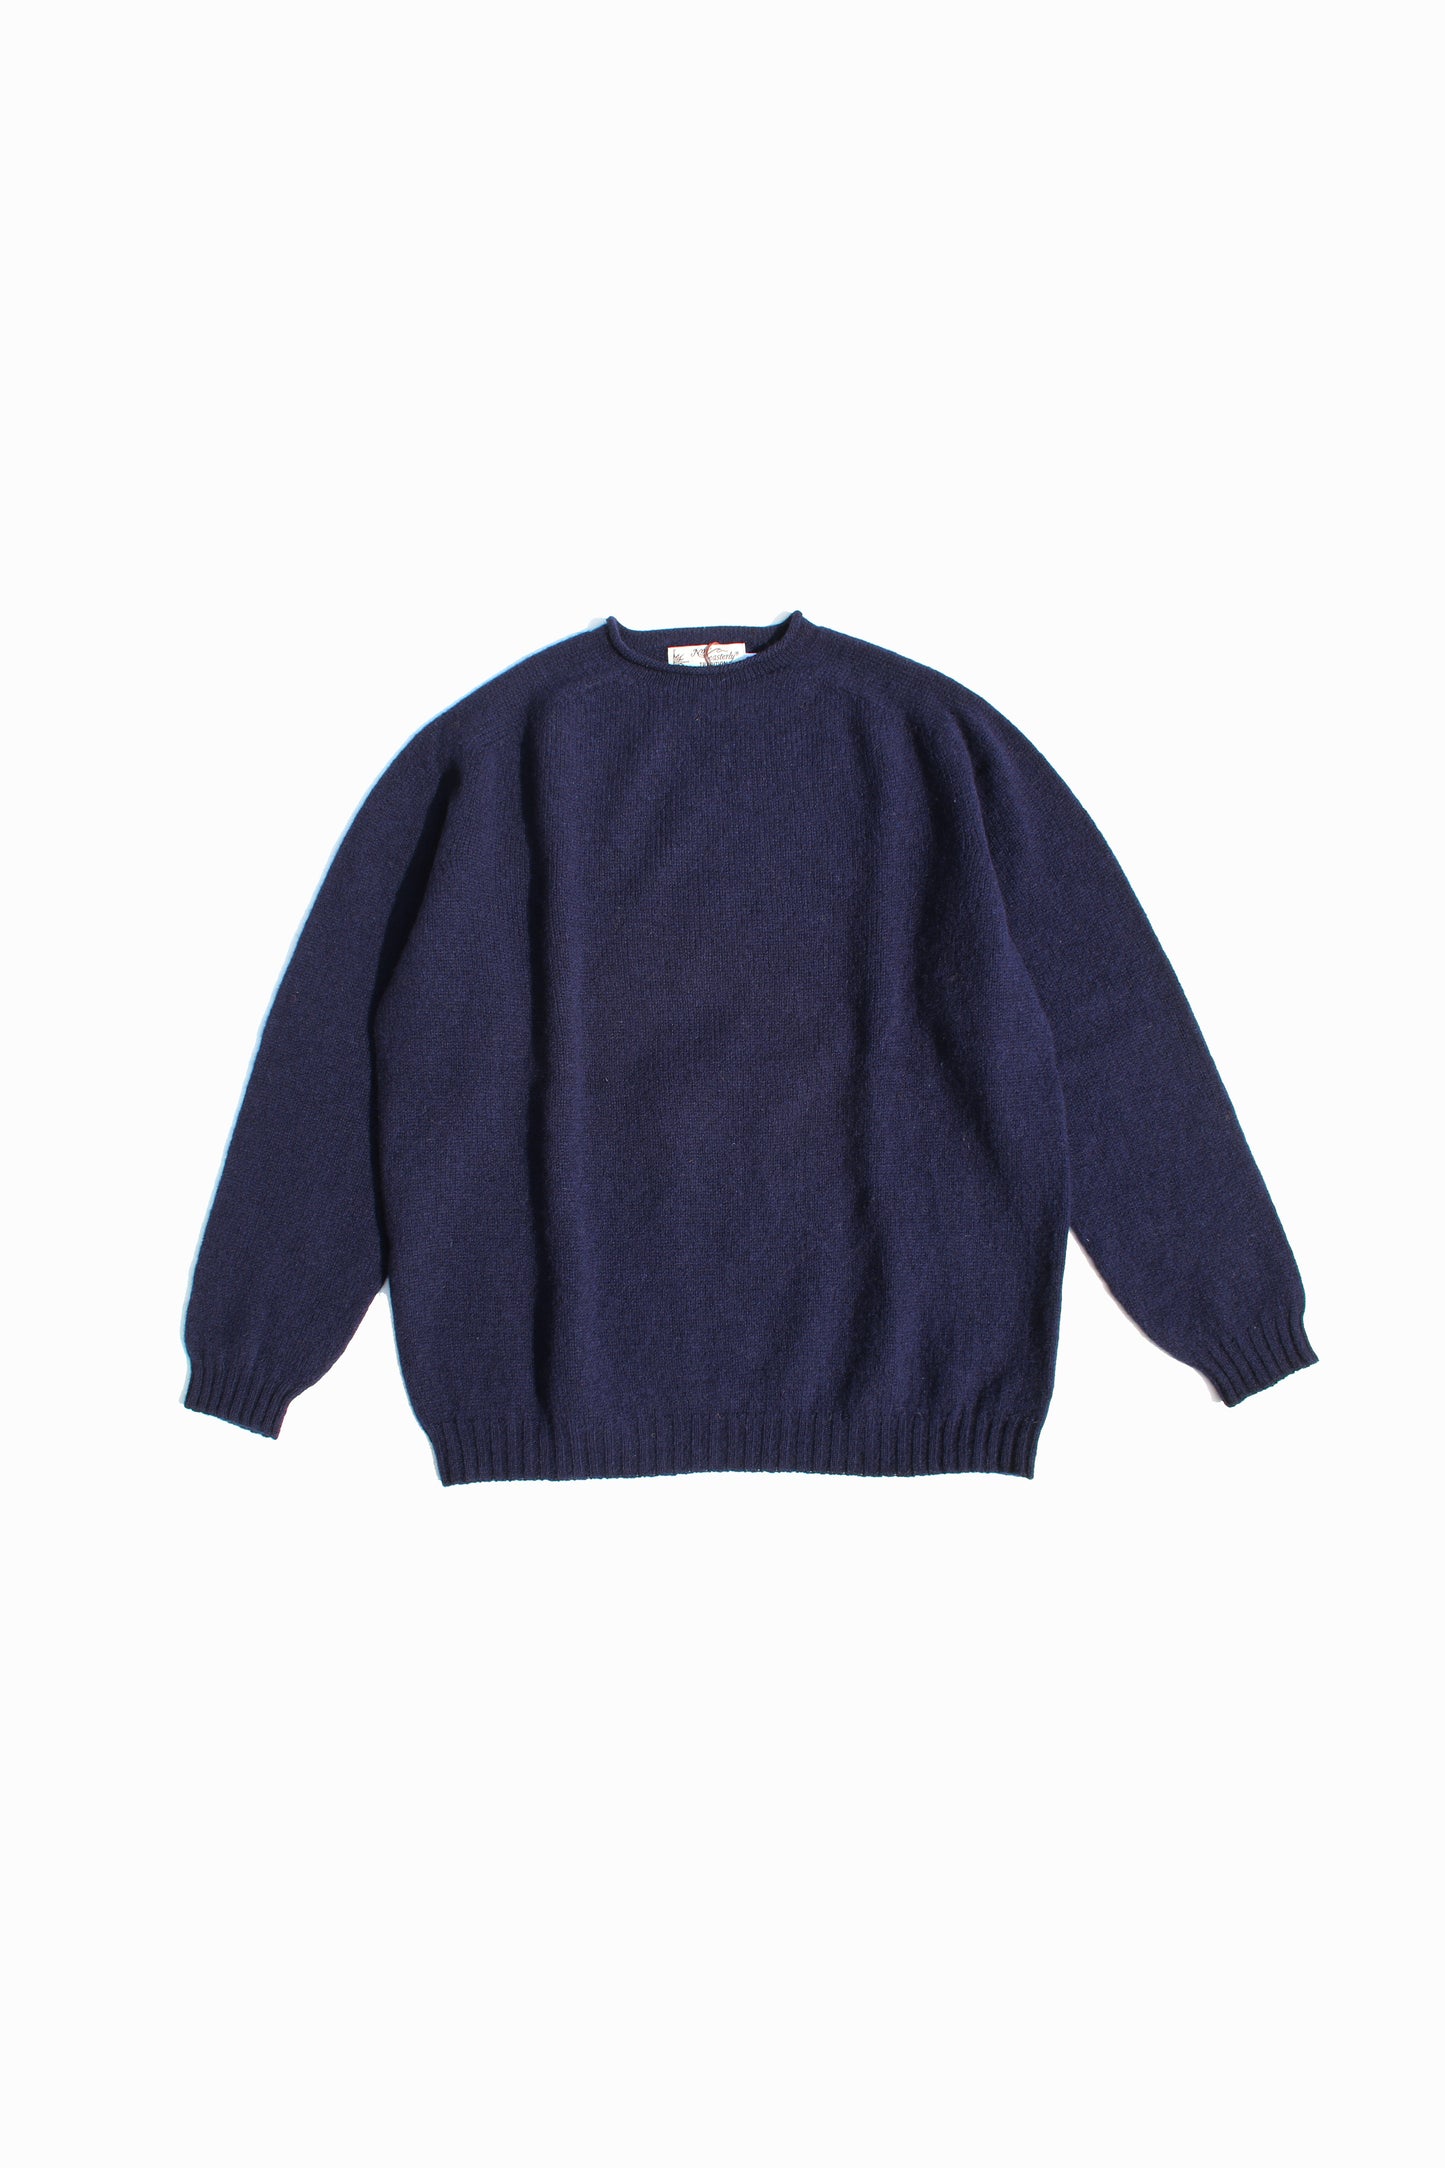 NOR’EASTERLY SCOTLAND L/S ROLL NECK KNIT - NEW NAVY